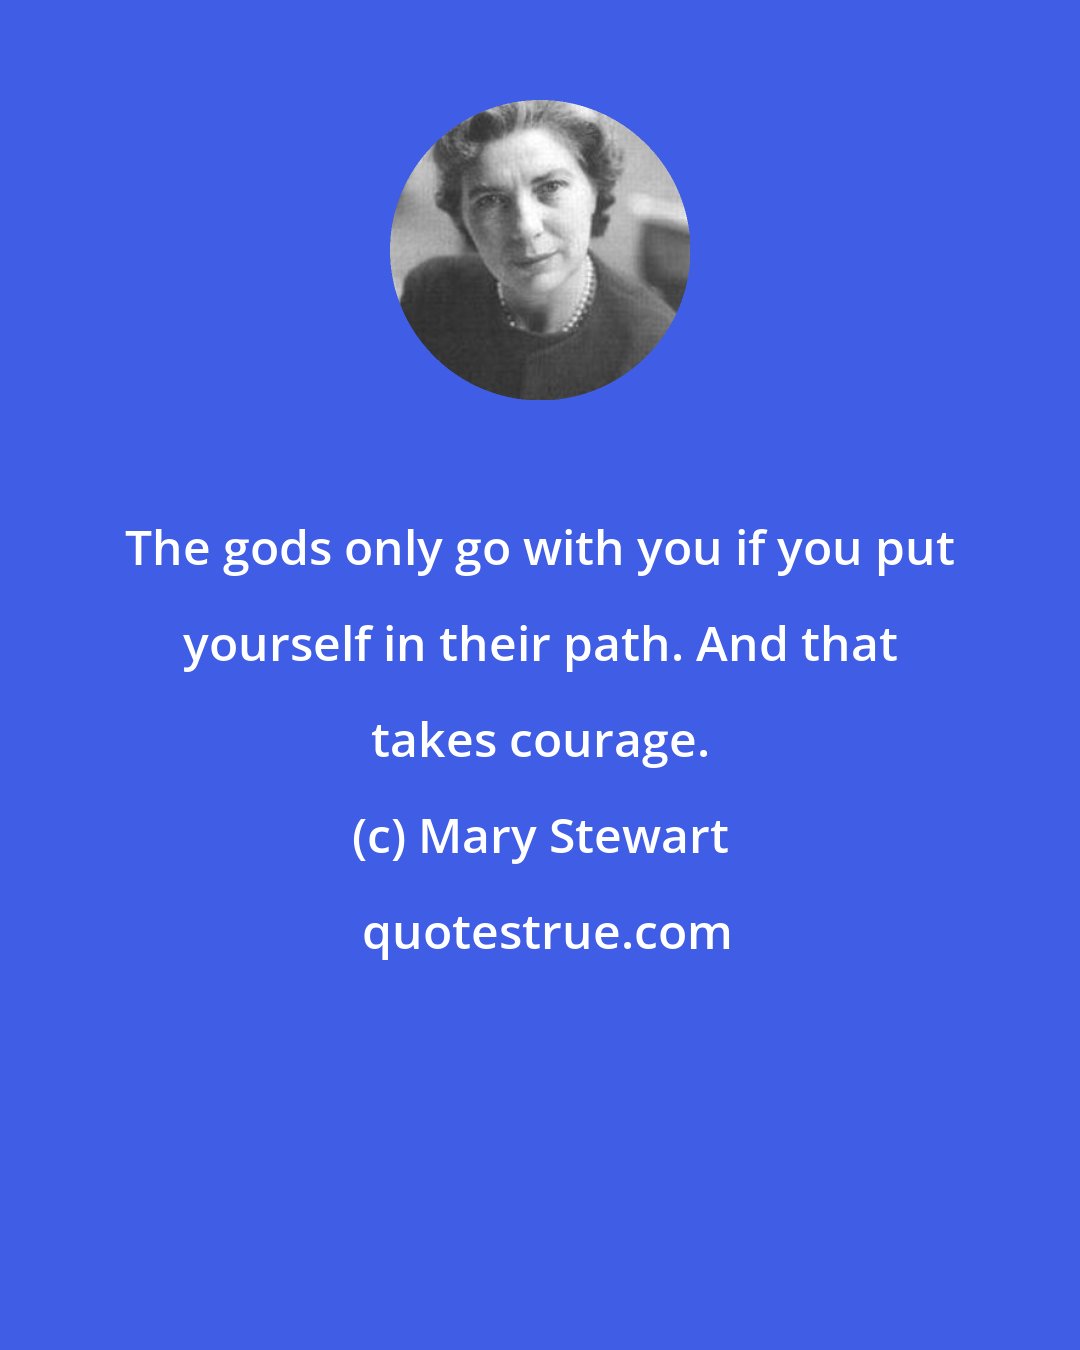 Mary Stewart: The gods only go with you if you put yourself in their path. And that takes courage.